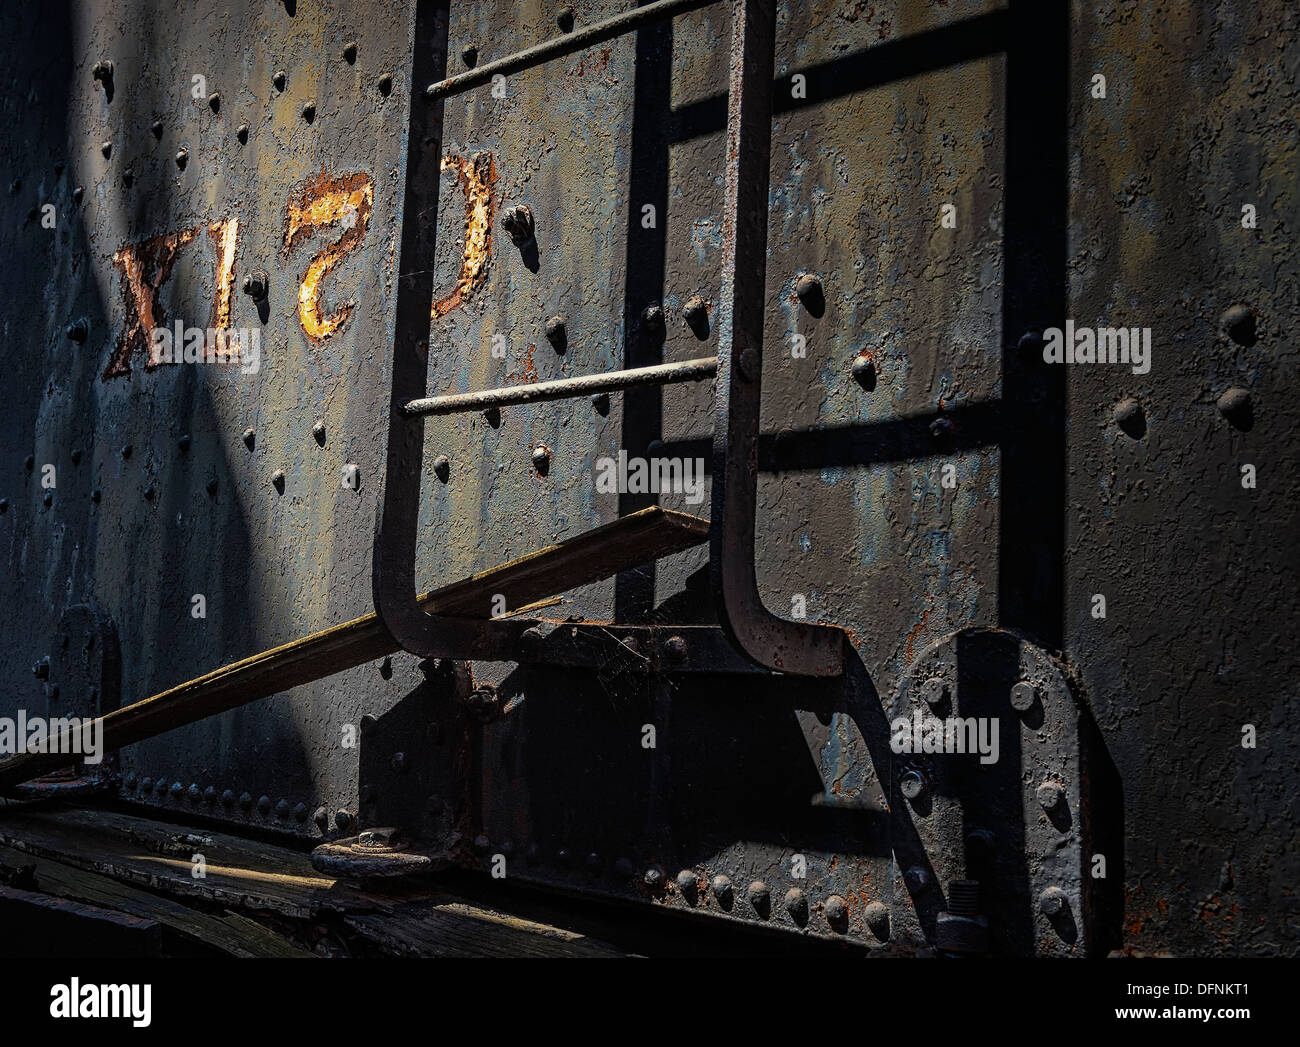 An editorial detail image of a coal tender for a steam locomotive. Stock Photo